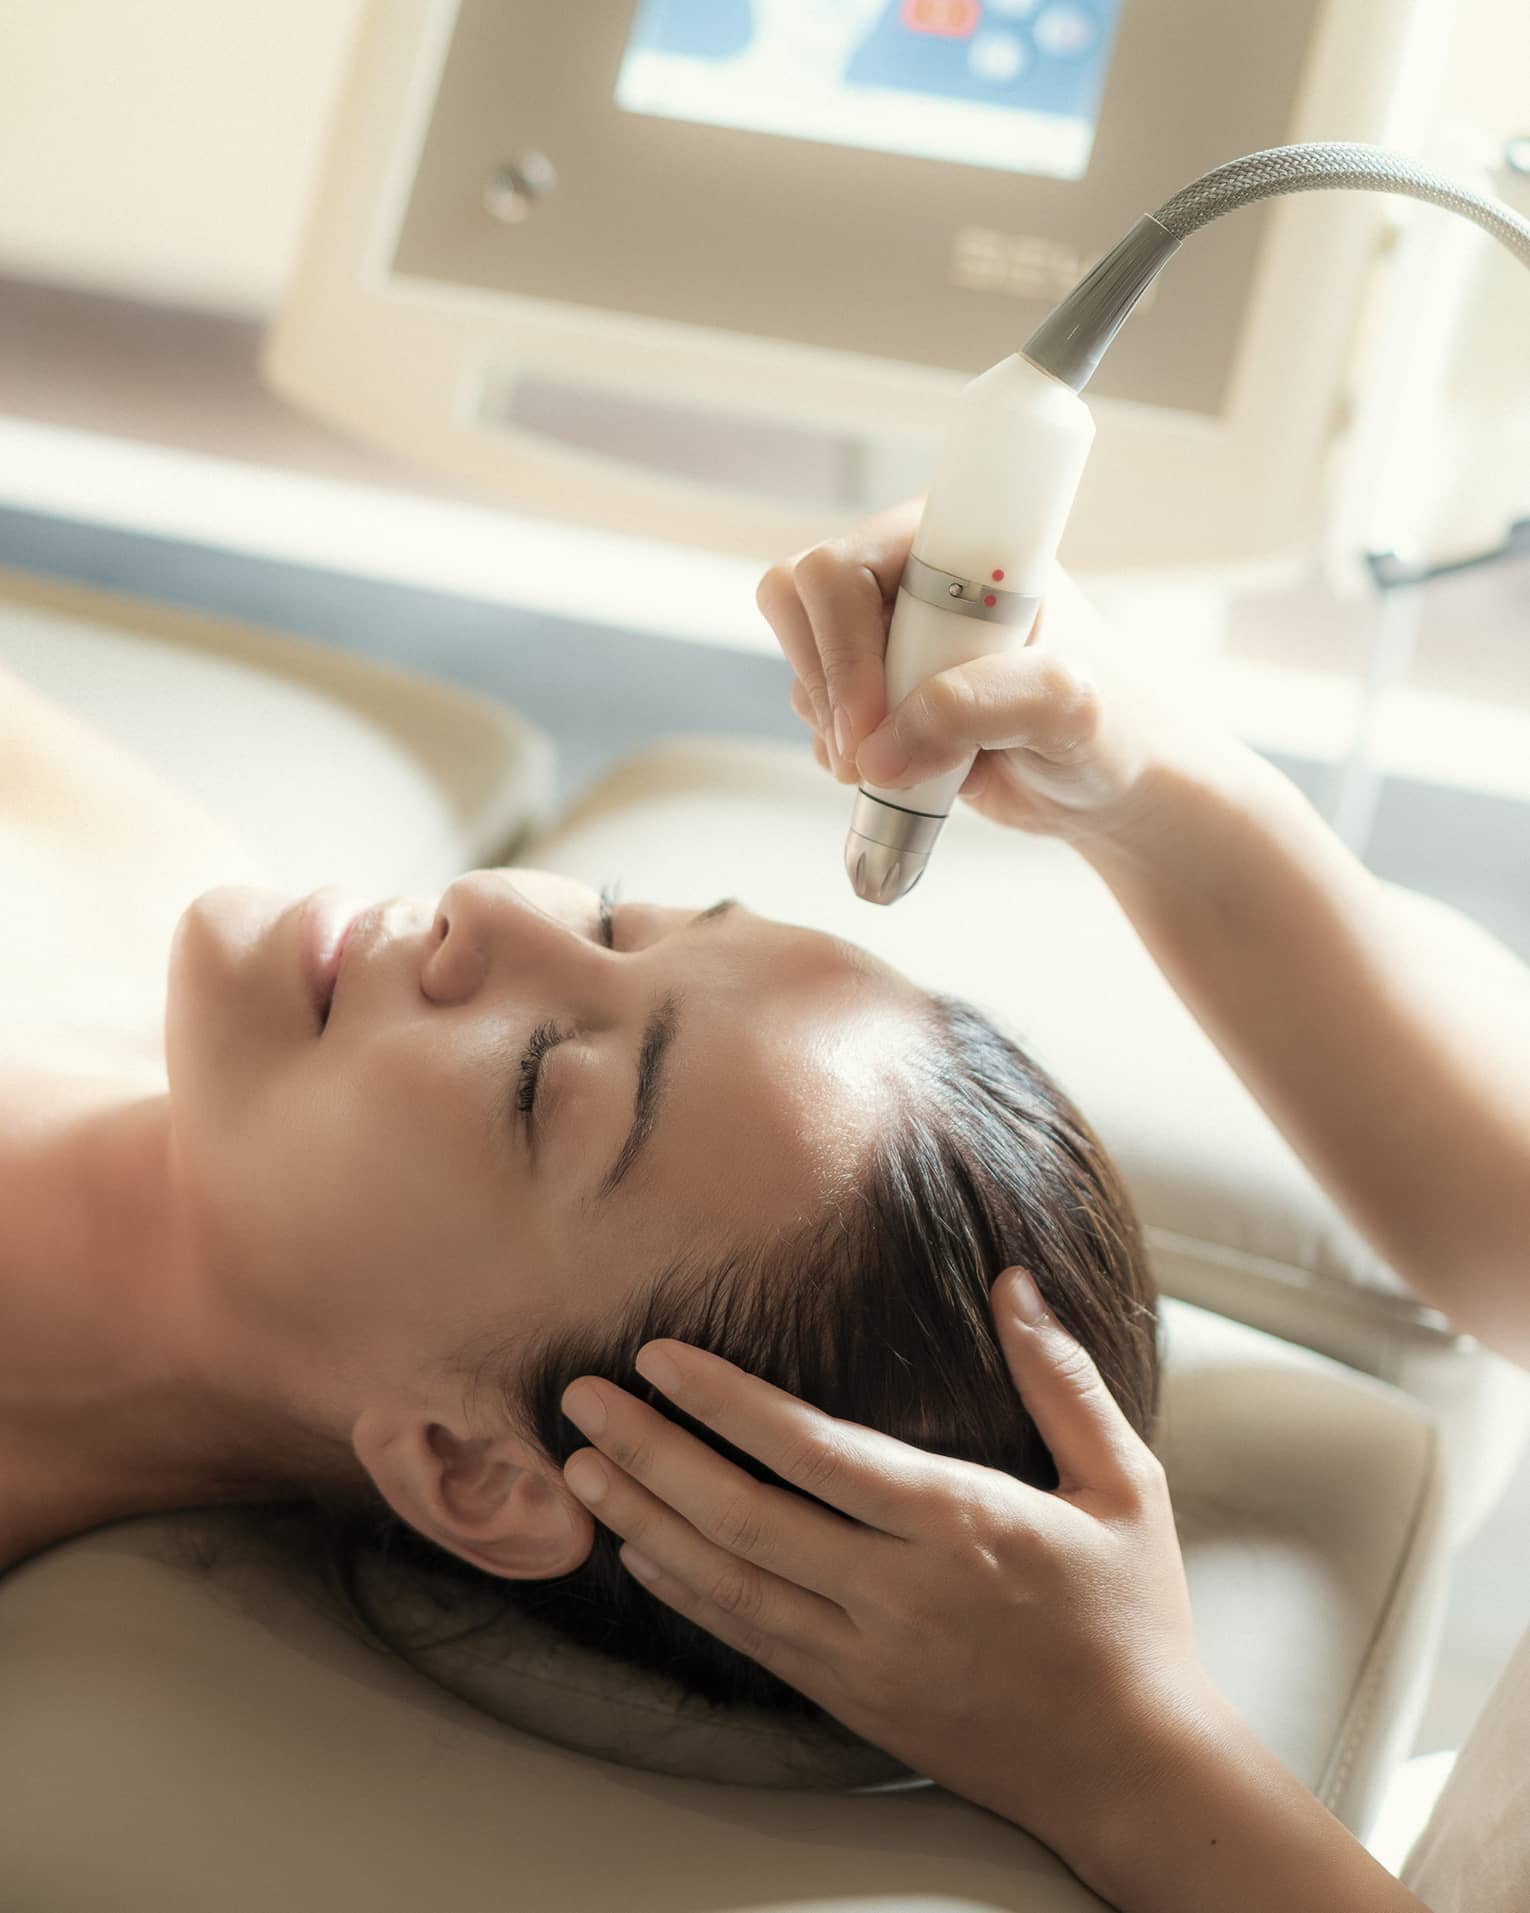 An aesthetician uses a tool on the face of a relaxing woman.